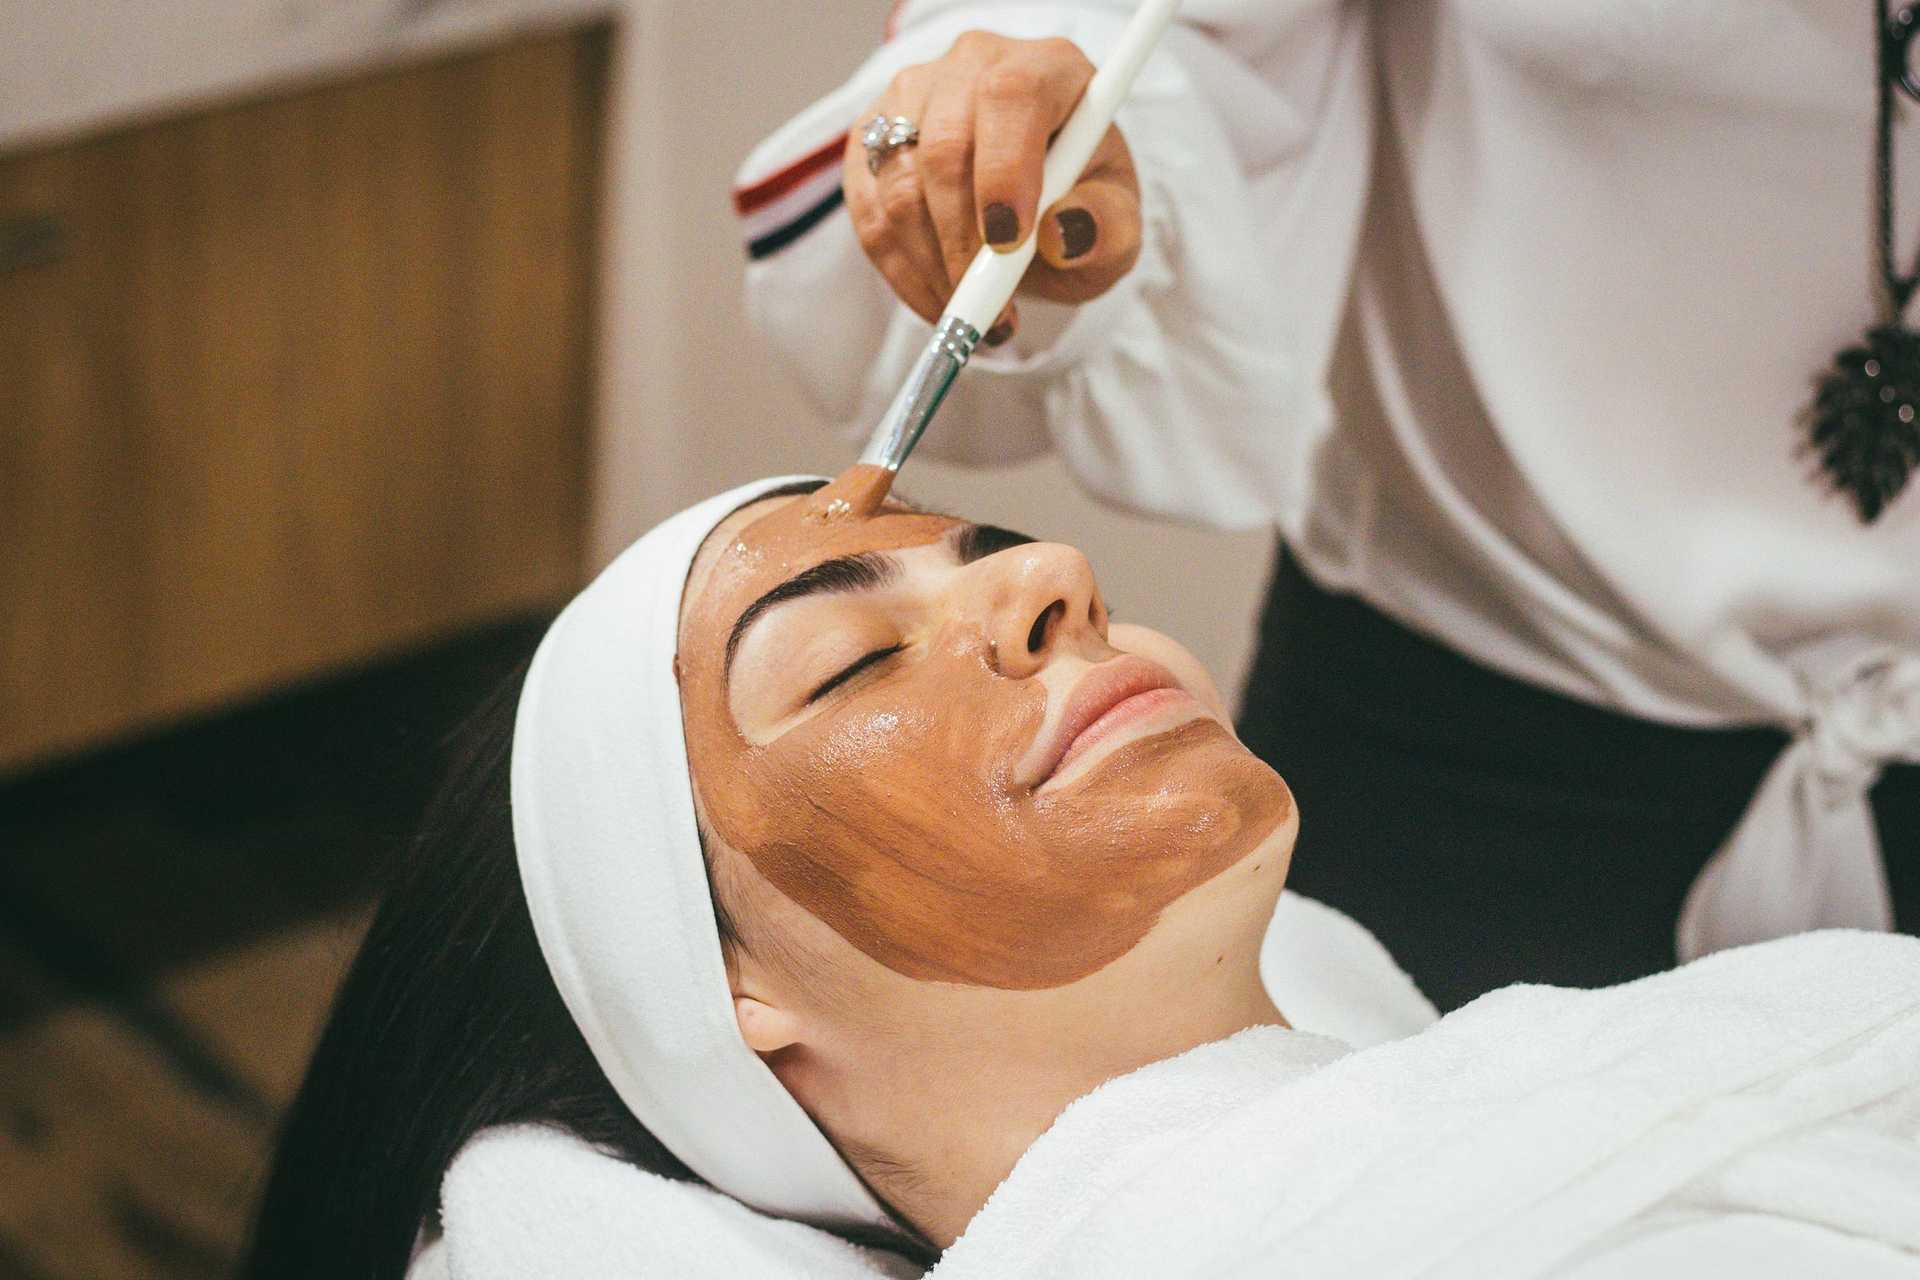 An aesthetician applies a facial mask to a relaxed client's skin. The client lies back with eyes closed and hair pulled away from her face, as the aesthetician uses a brush to gently paint a facial mask onto her skin.